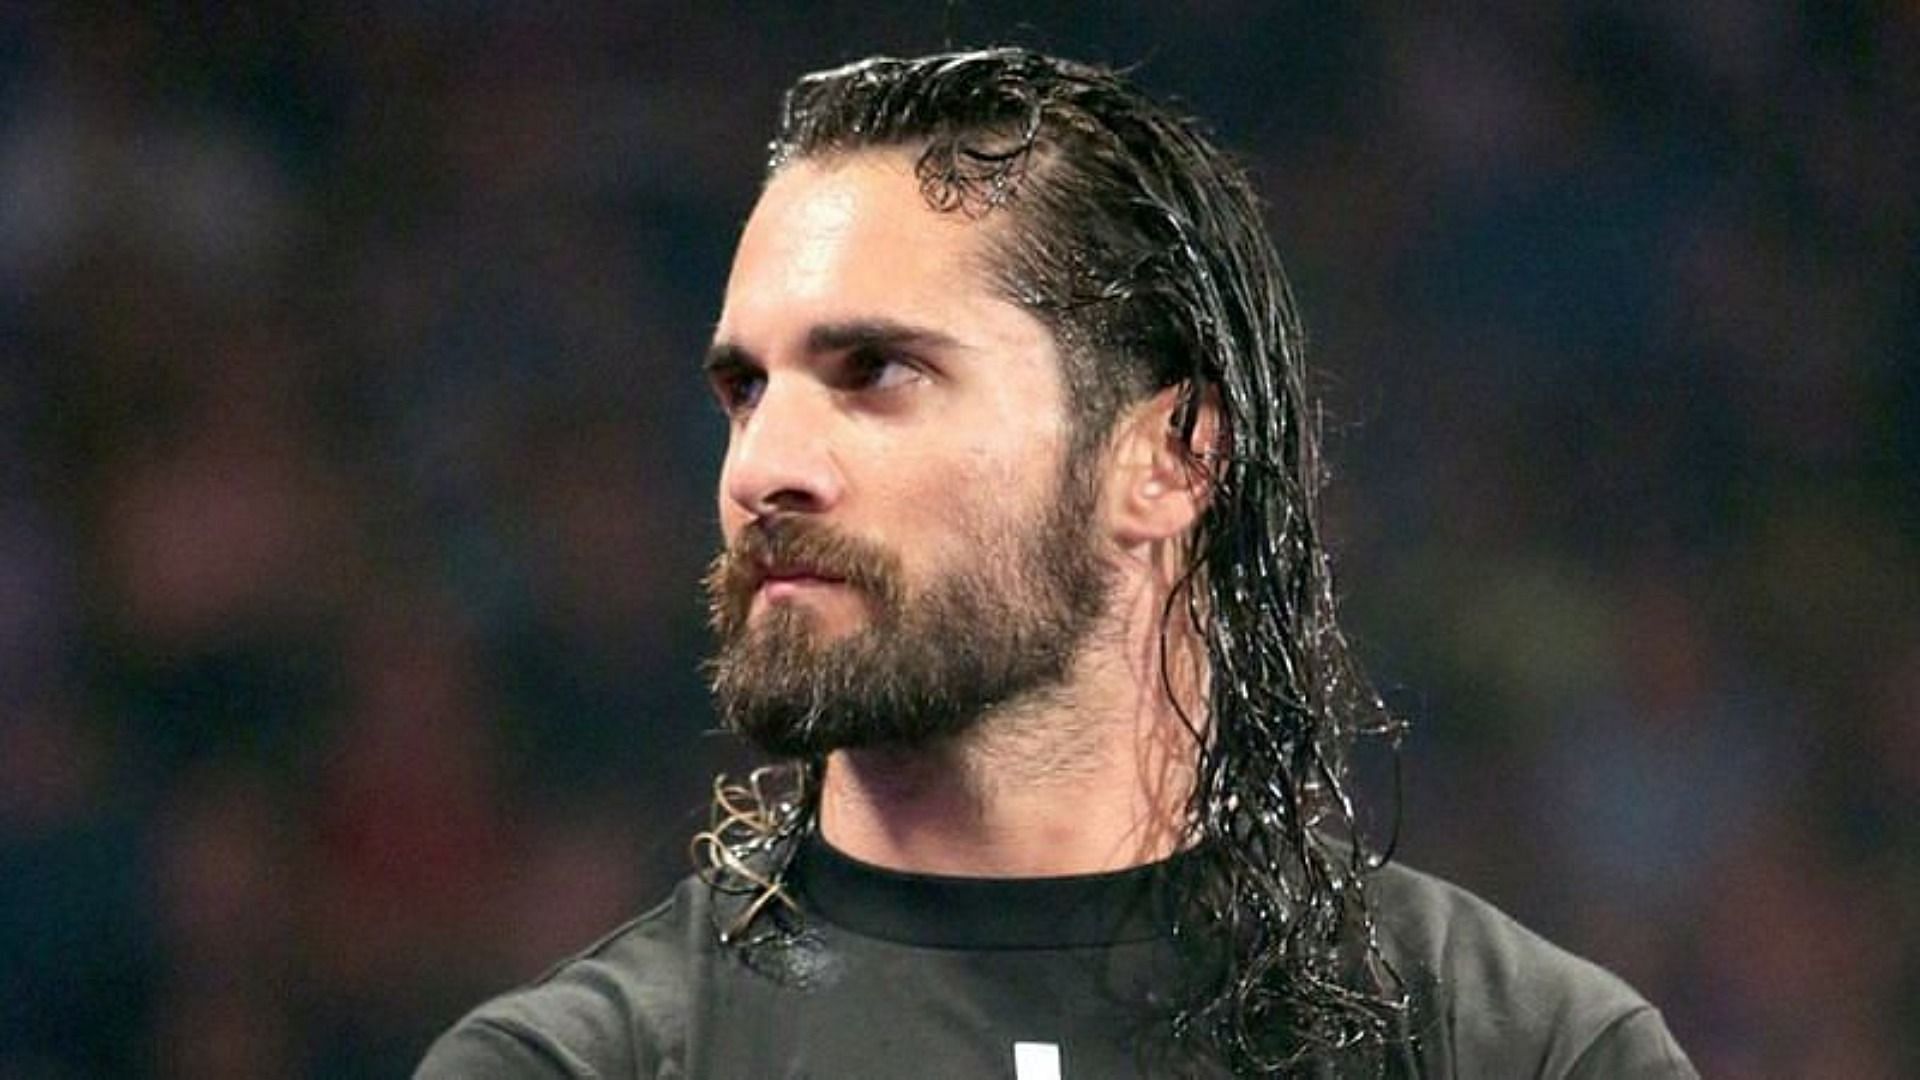 Seth Rollins has a new updated ring name